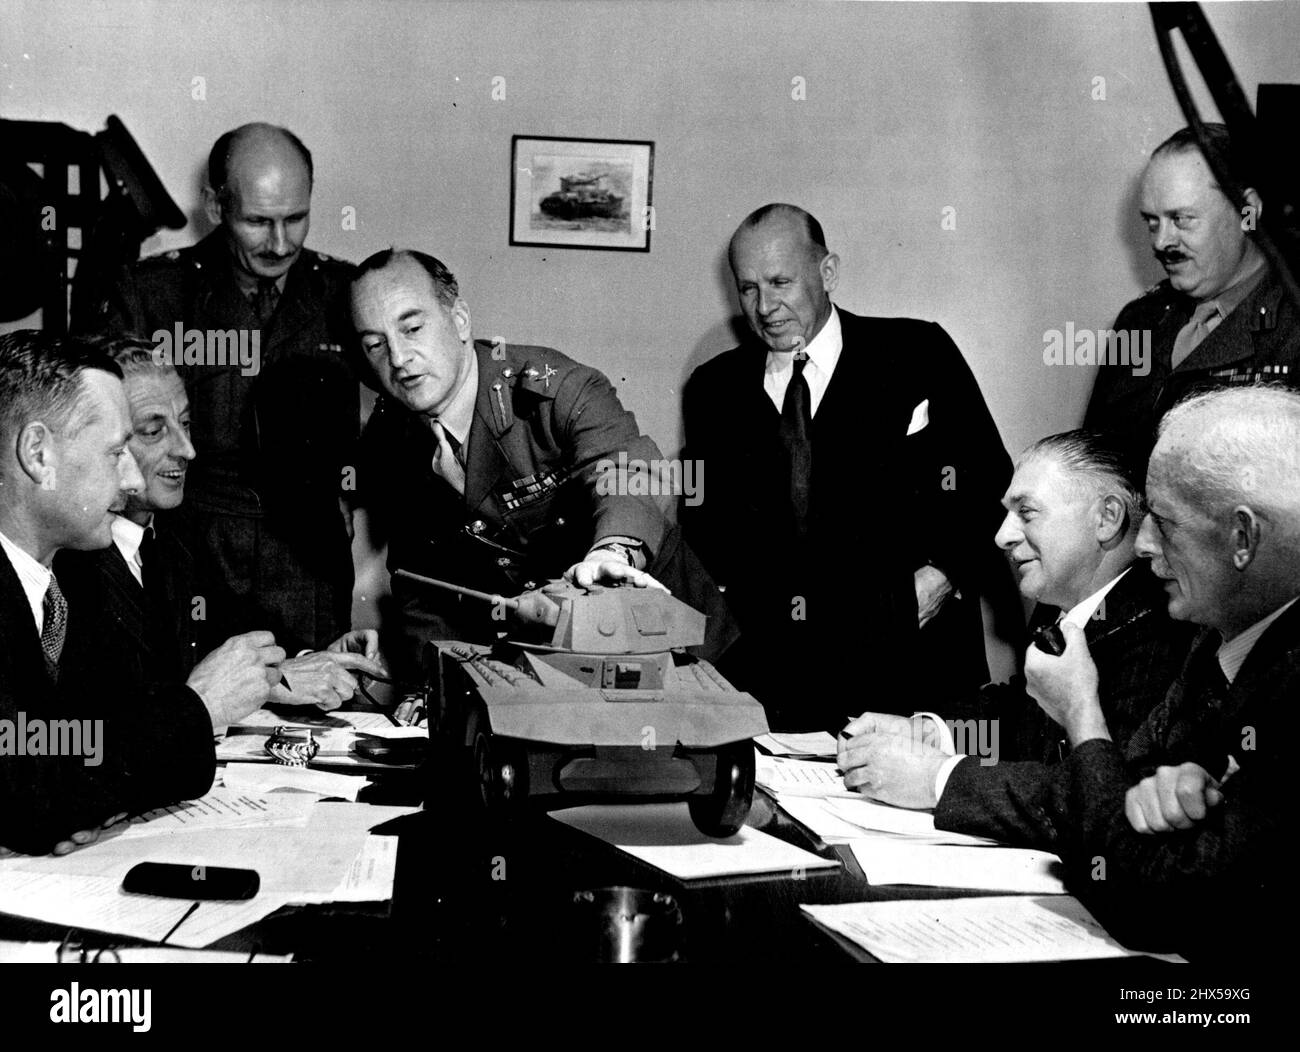 Take Expert Heads Production Team -- Major. General H.E. Pyman is Director-General of Fighting Vehicles.Here Major General Pyman President at his monthly conference at the Ministry's Tank proving and Experimental establishment. Technical experts listening to him enumerating points about an armoured car model are: (left to right) Brig. O.E. Chapman, Chief Inspector of Fighting Vehicles, Mr. A.E. Masters, Chief Engineer, Brig. S.R.W. Clarke, Chief of the Fighting Vehicle Proving Establishment, Major General H.E. Pyman, Mr. W.E. Millar. Director of wheeled vehicle Production, Brig. W.S. King, Dir Stock Photo